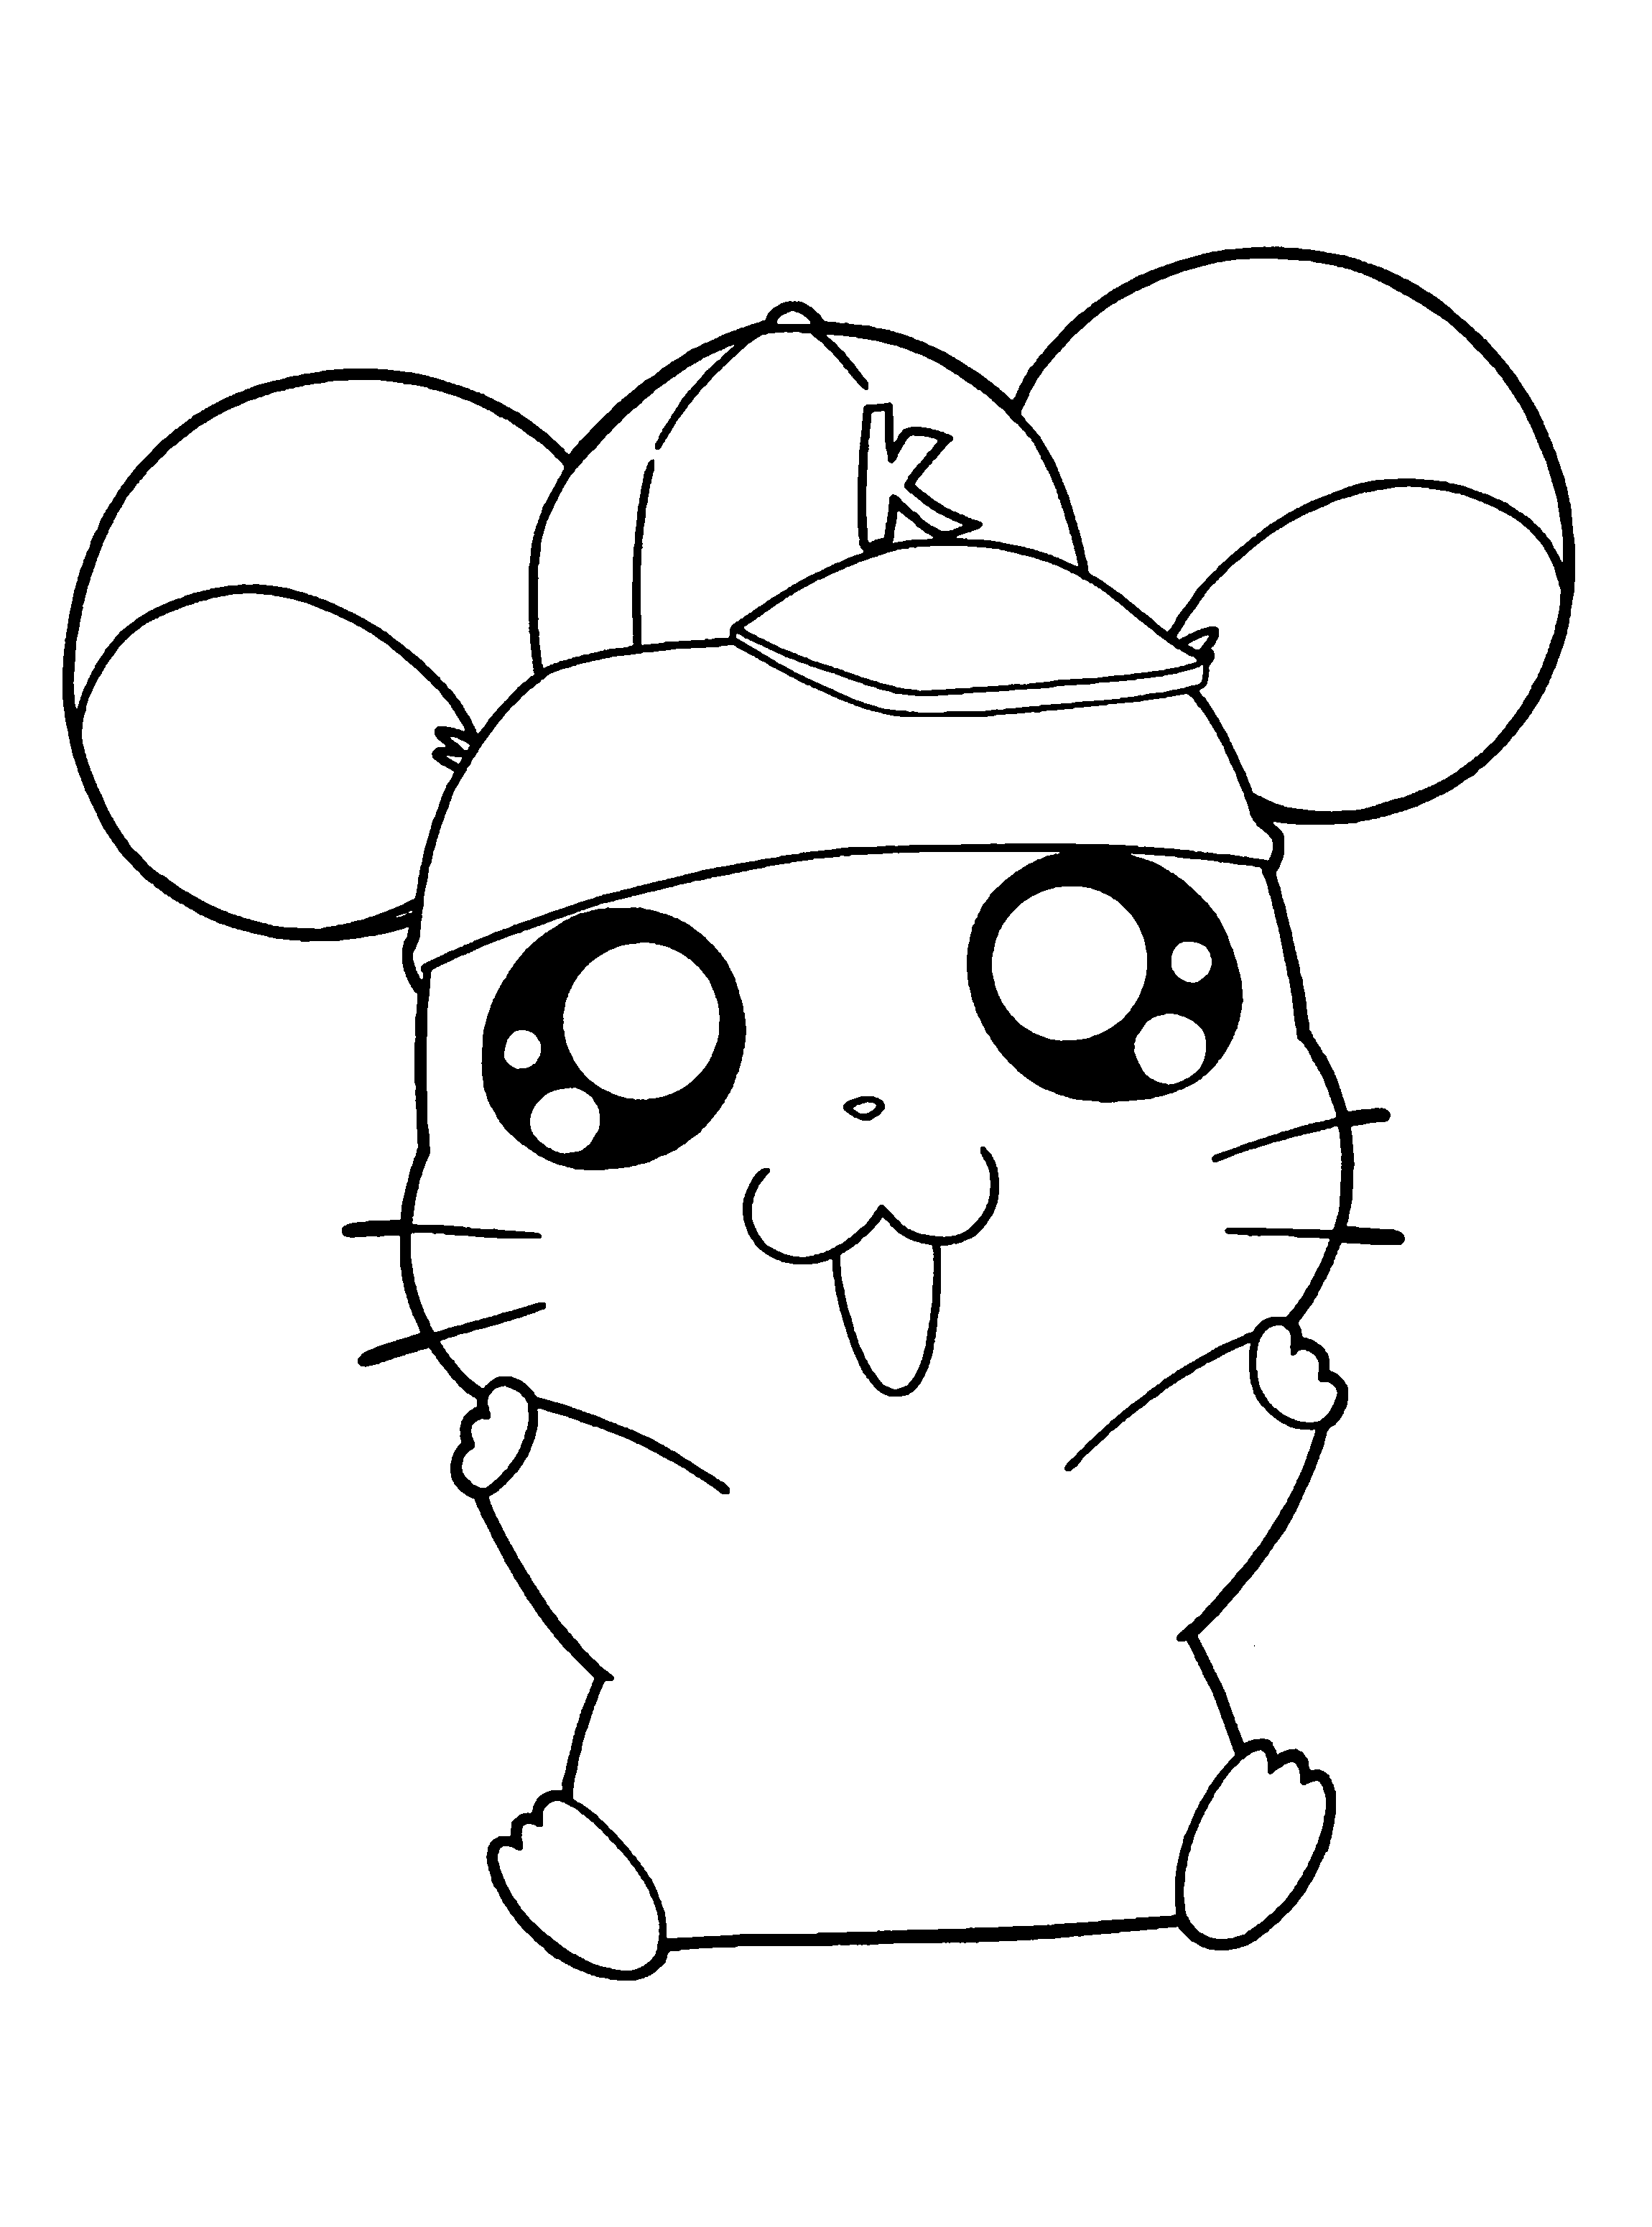 Chinchilla Coloring Pages   Coloring Home